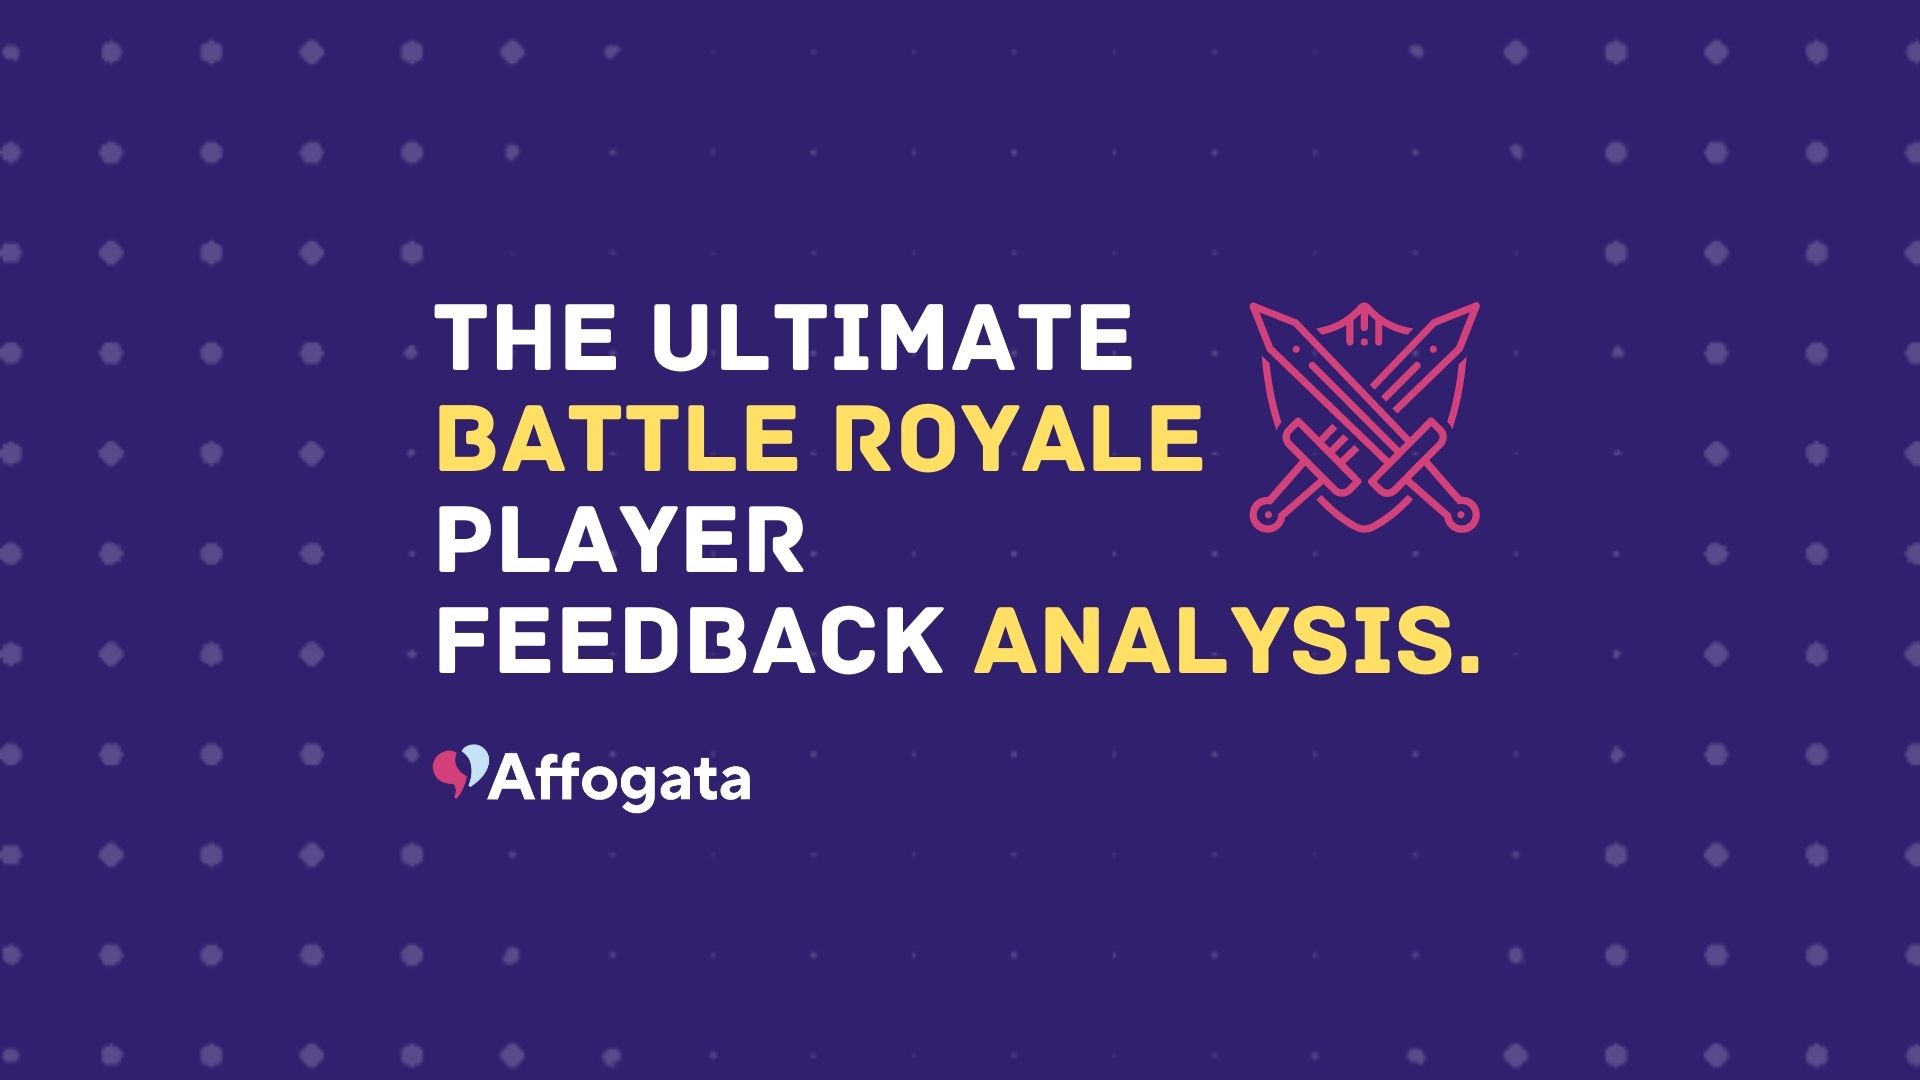 The ultimate battle royale player feedback analysis